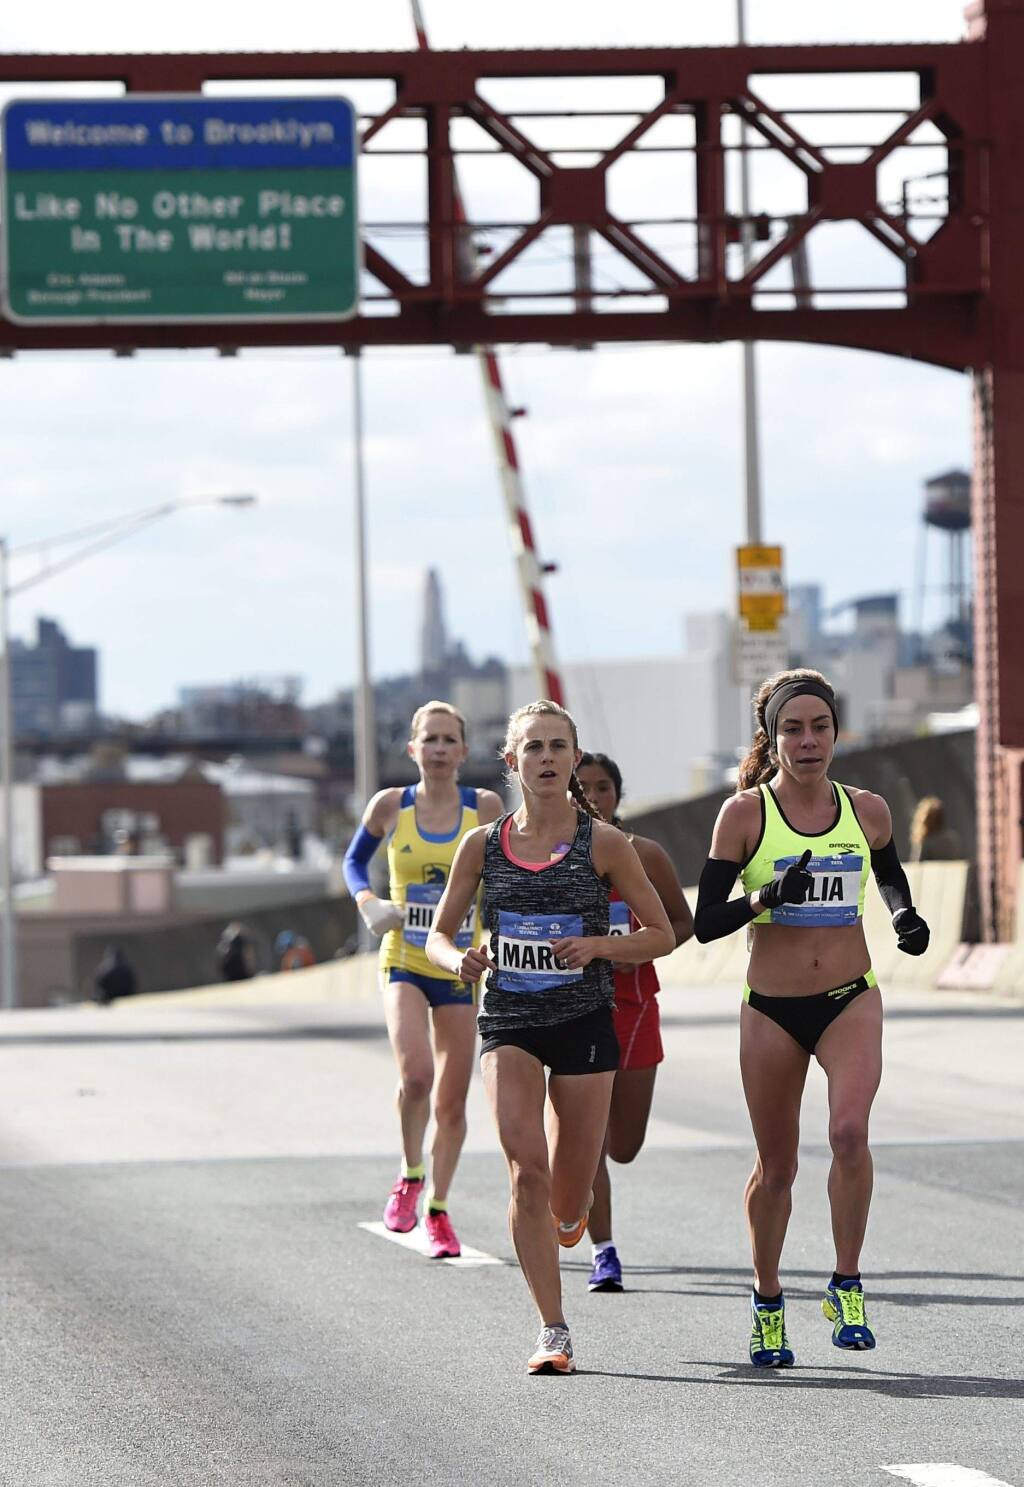 Hilary Dionne of the Untied States, left, Marci Gage of the United States, center, and Alia Gray of the Untied States cross the Pulaski Bridge to enter the Queens borough of New York during the New York City Marathon on Sunday, Nov. 2, 2014, in New York. Dionne finished 18th, Gage finished 17th and Gray finished 16th overall for women. (AP Photo/Kathy Kmonicek)